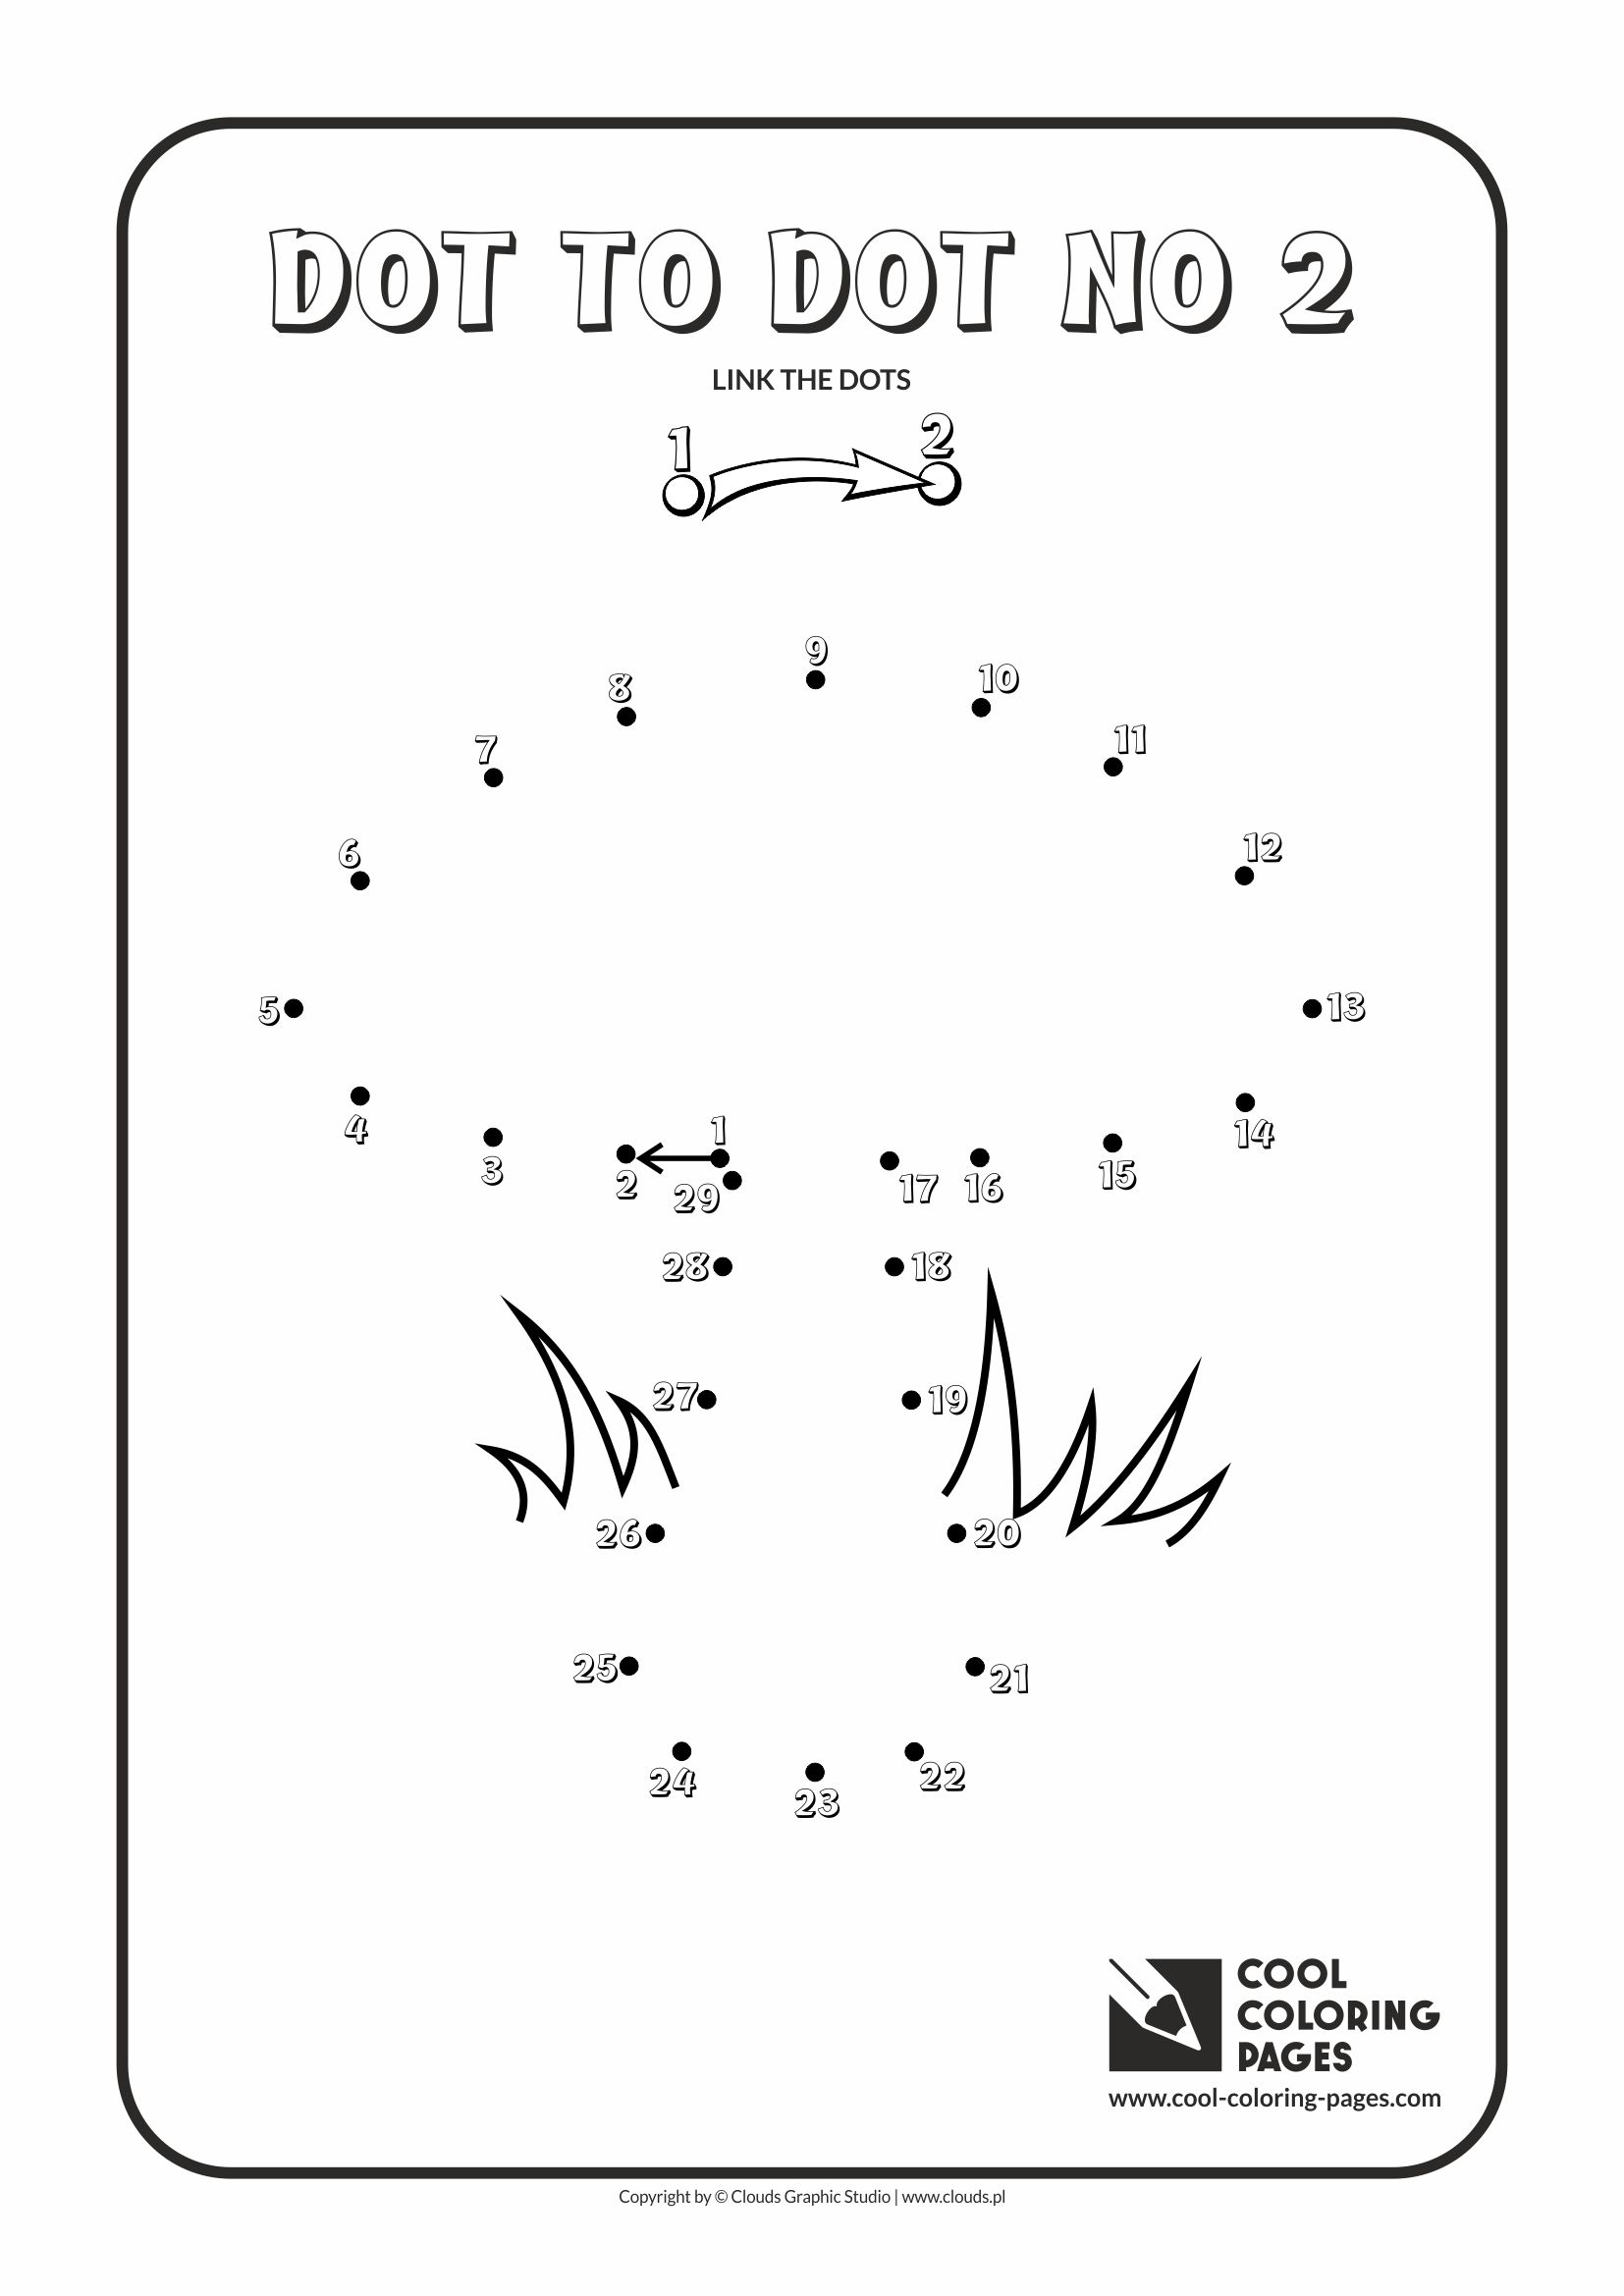 Cool Coloring Pages - Dot to dot / Dot to dot no 2